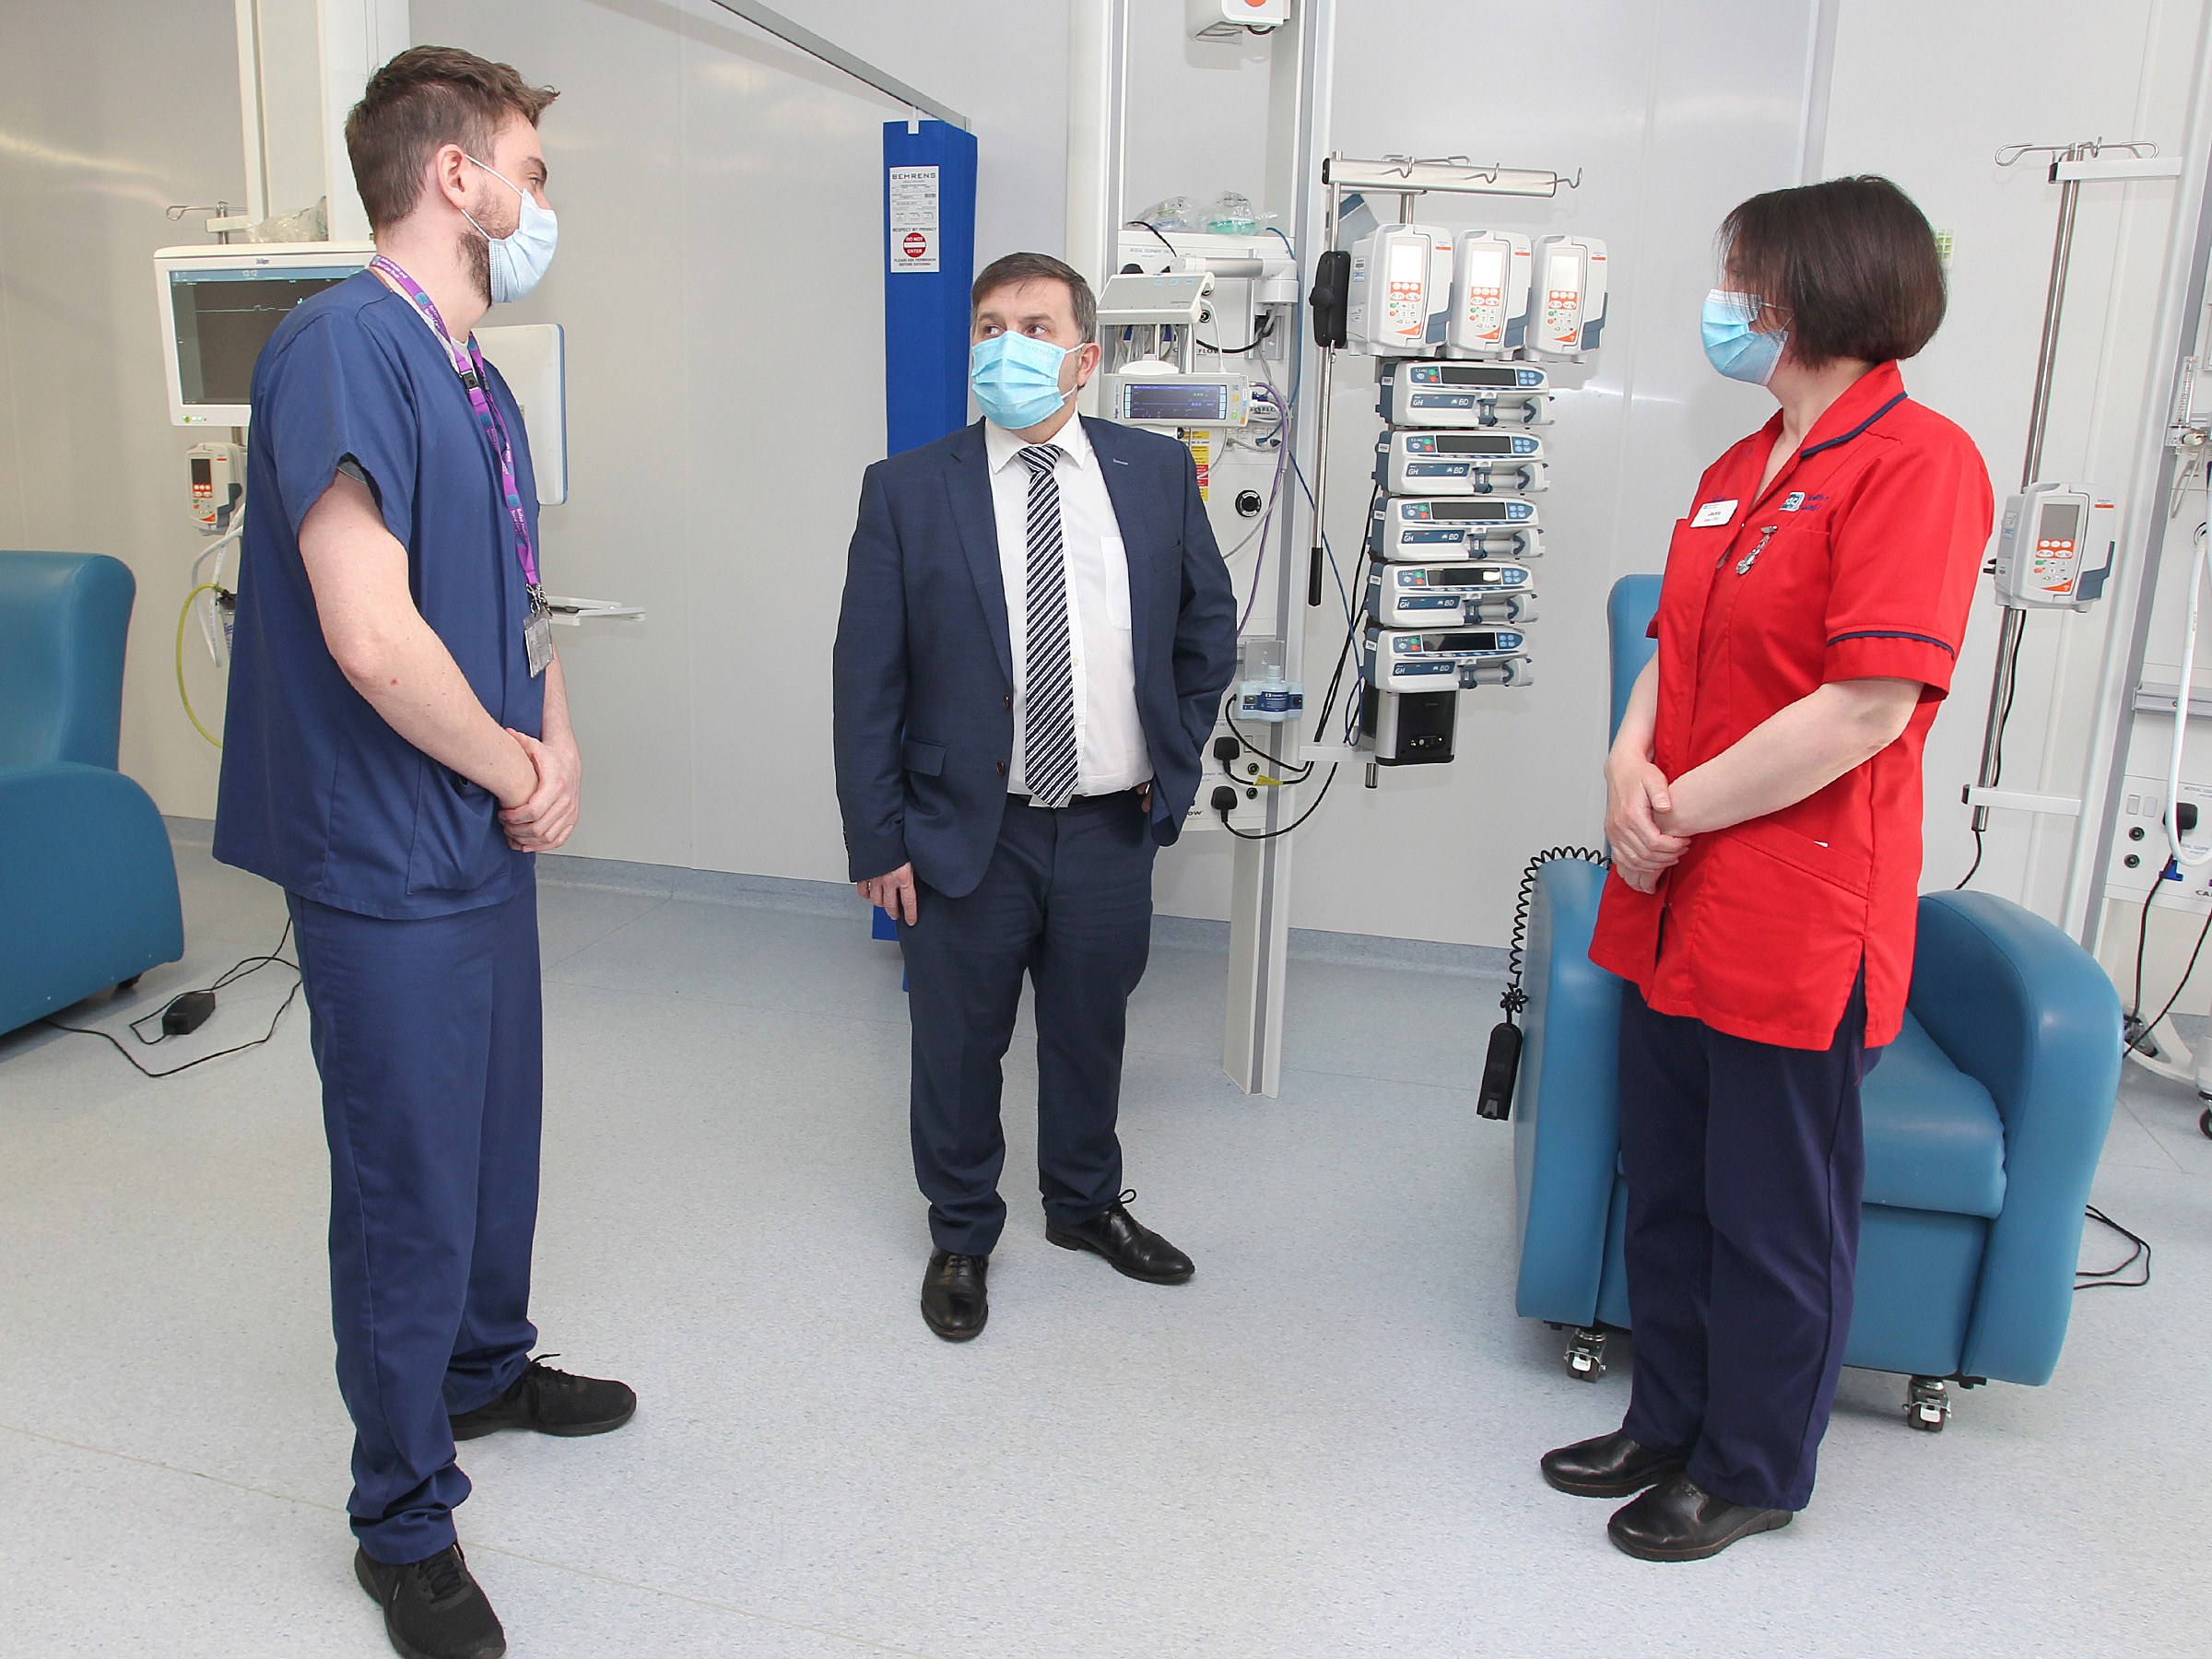 Health Minister visit to Mater Hospital